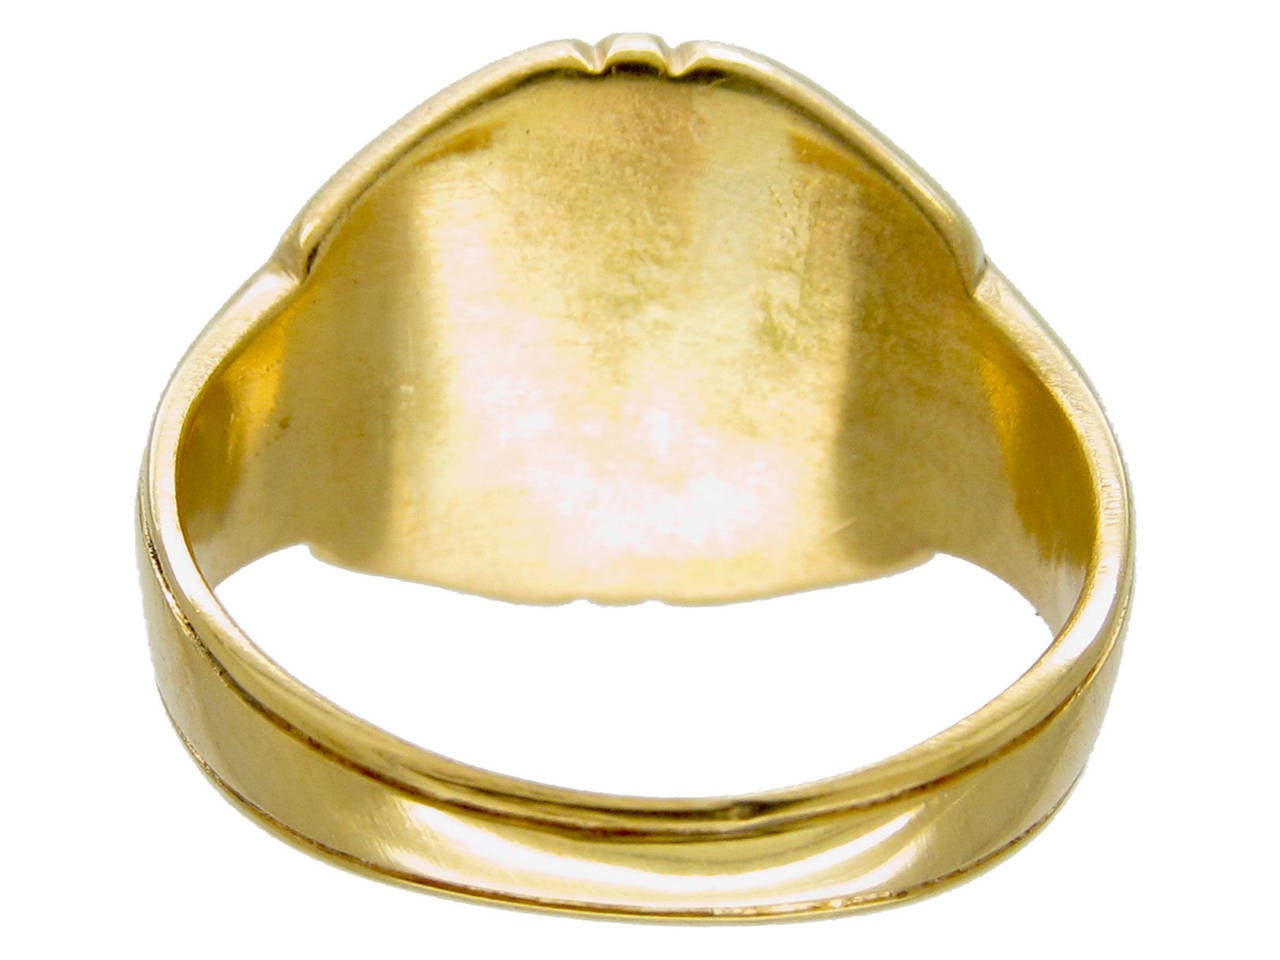 A wonderful rare 18ct gold signet ring which is Victorian, circa 1870. The motto is charming “Love Serves”, with a bull in the centre.